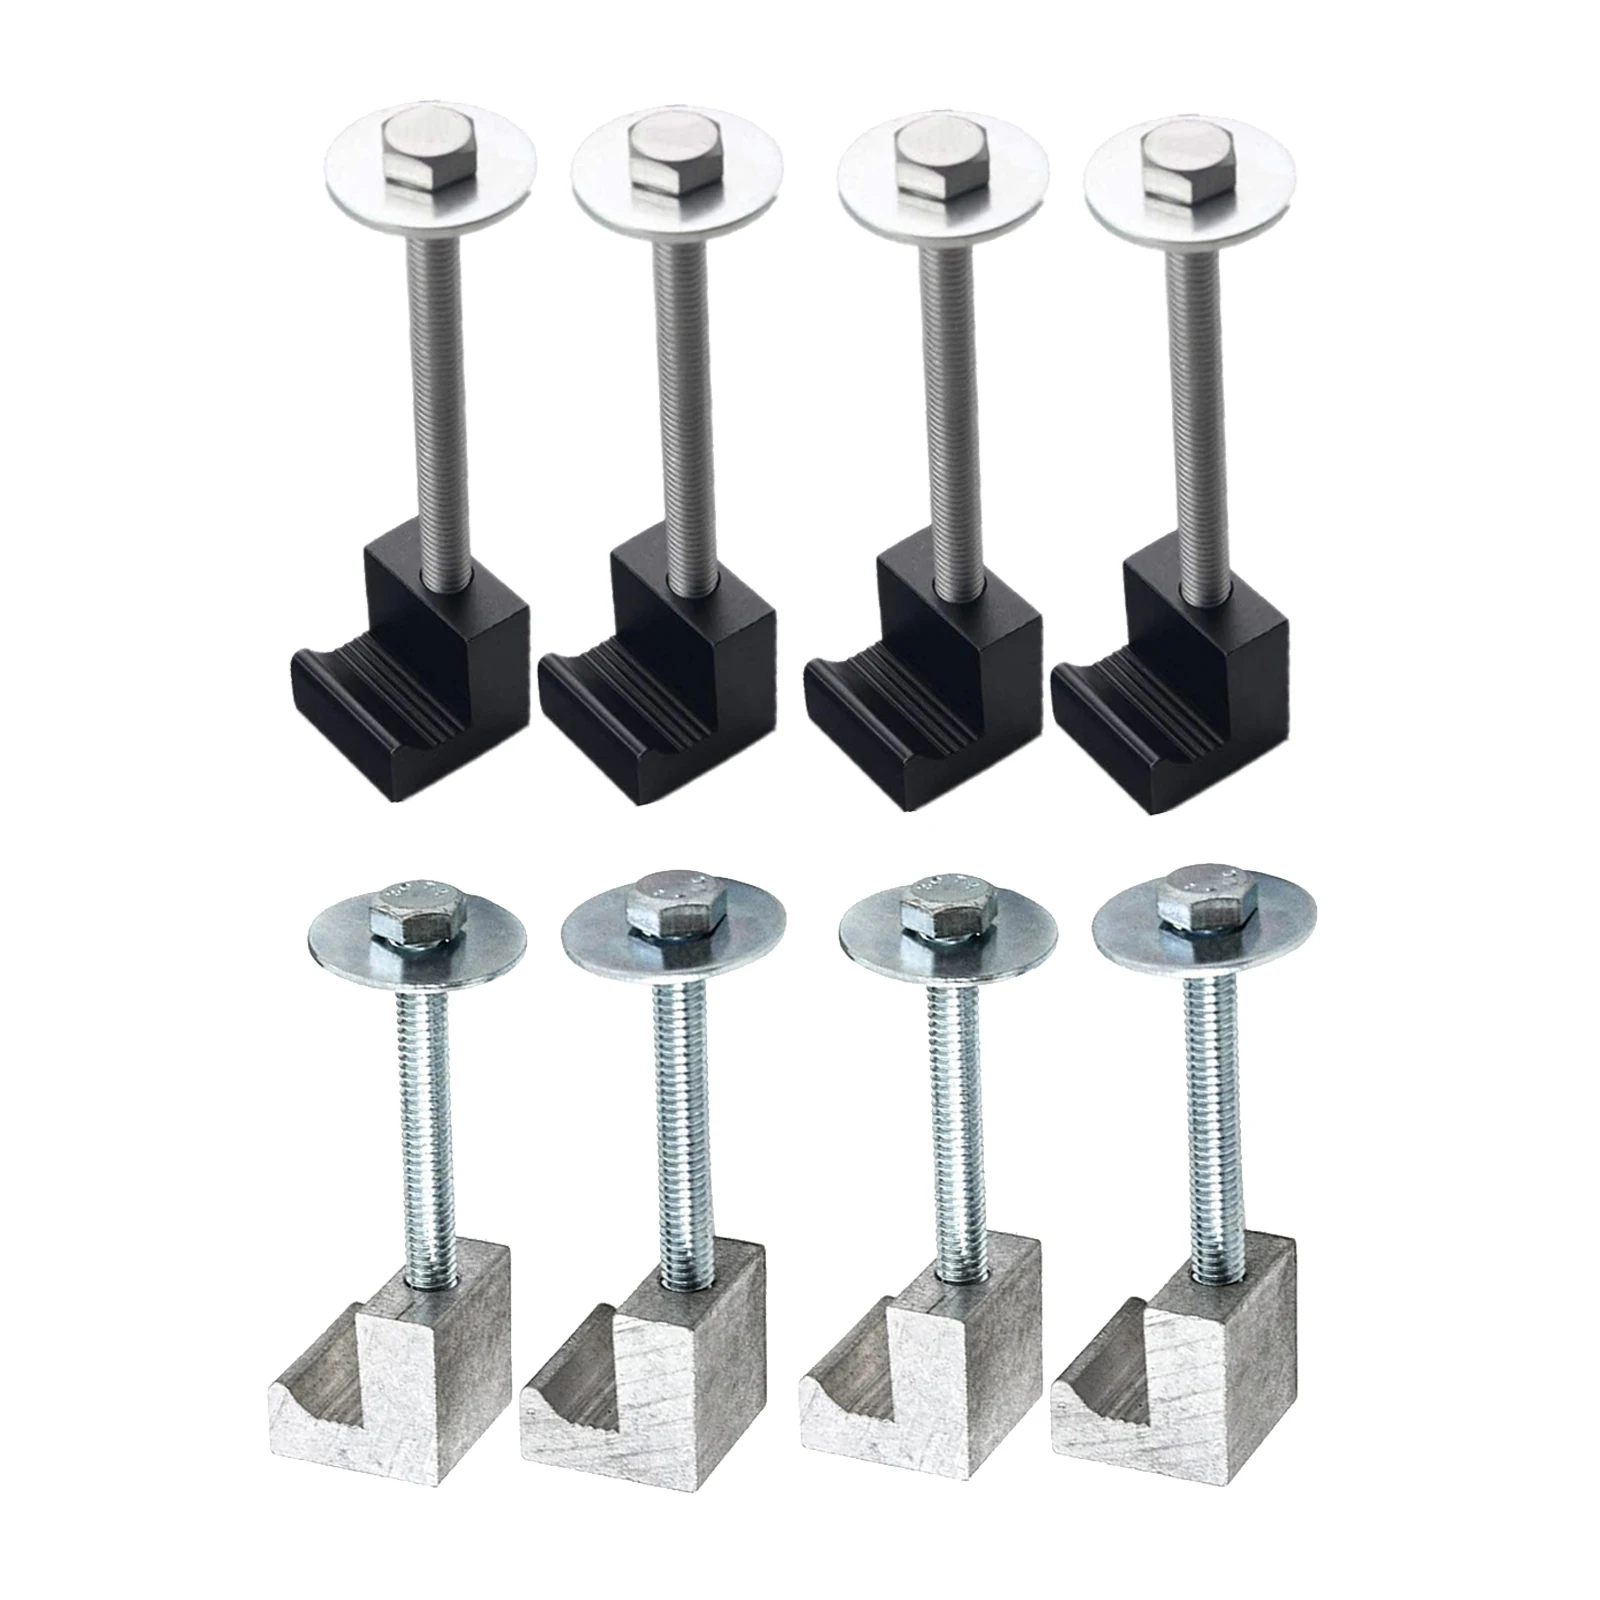 4x Truck Tool Box Mounting Clamps Upgraded Aluminum Tie Downs Universal Fit